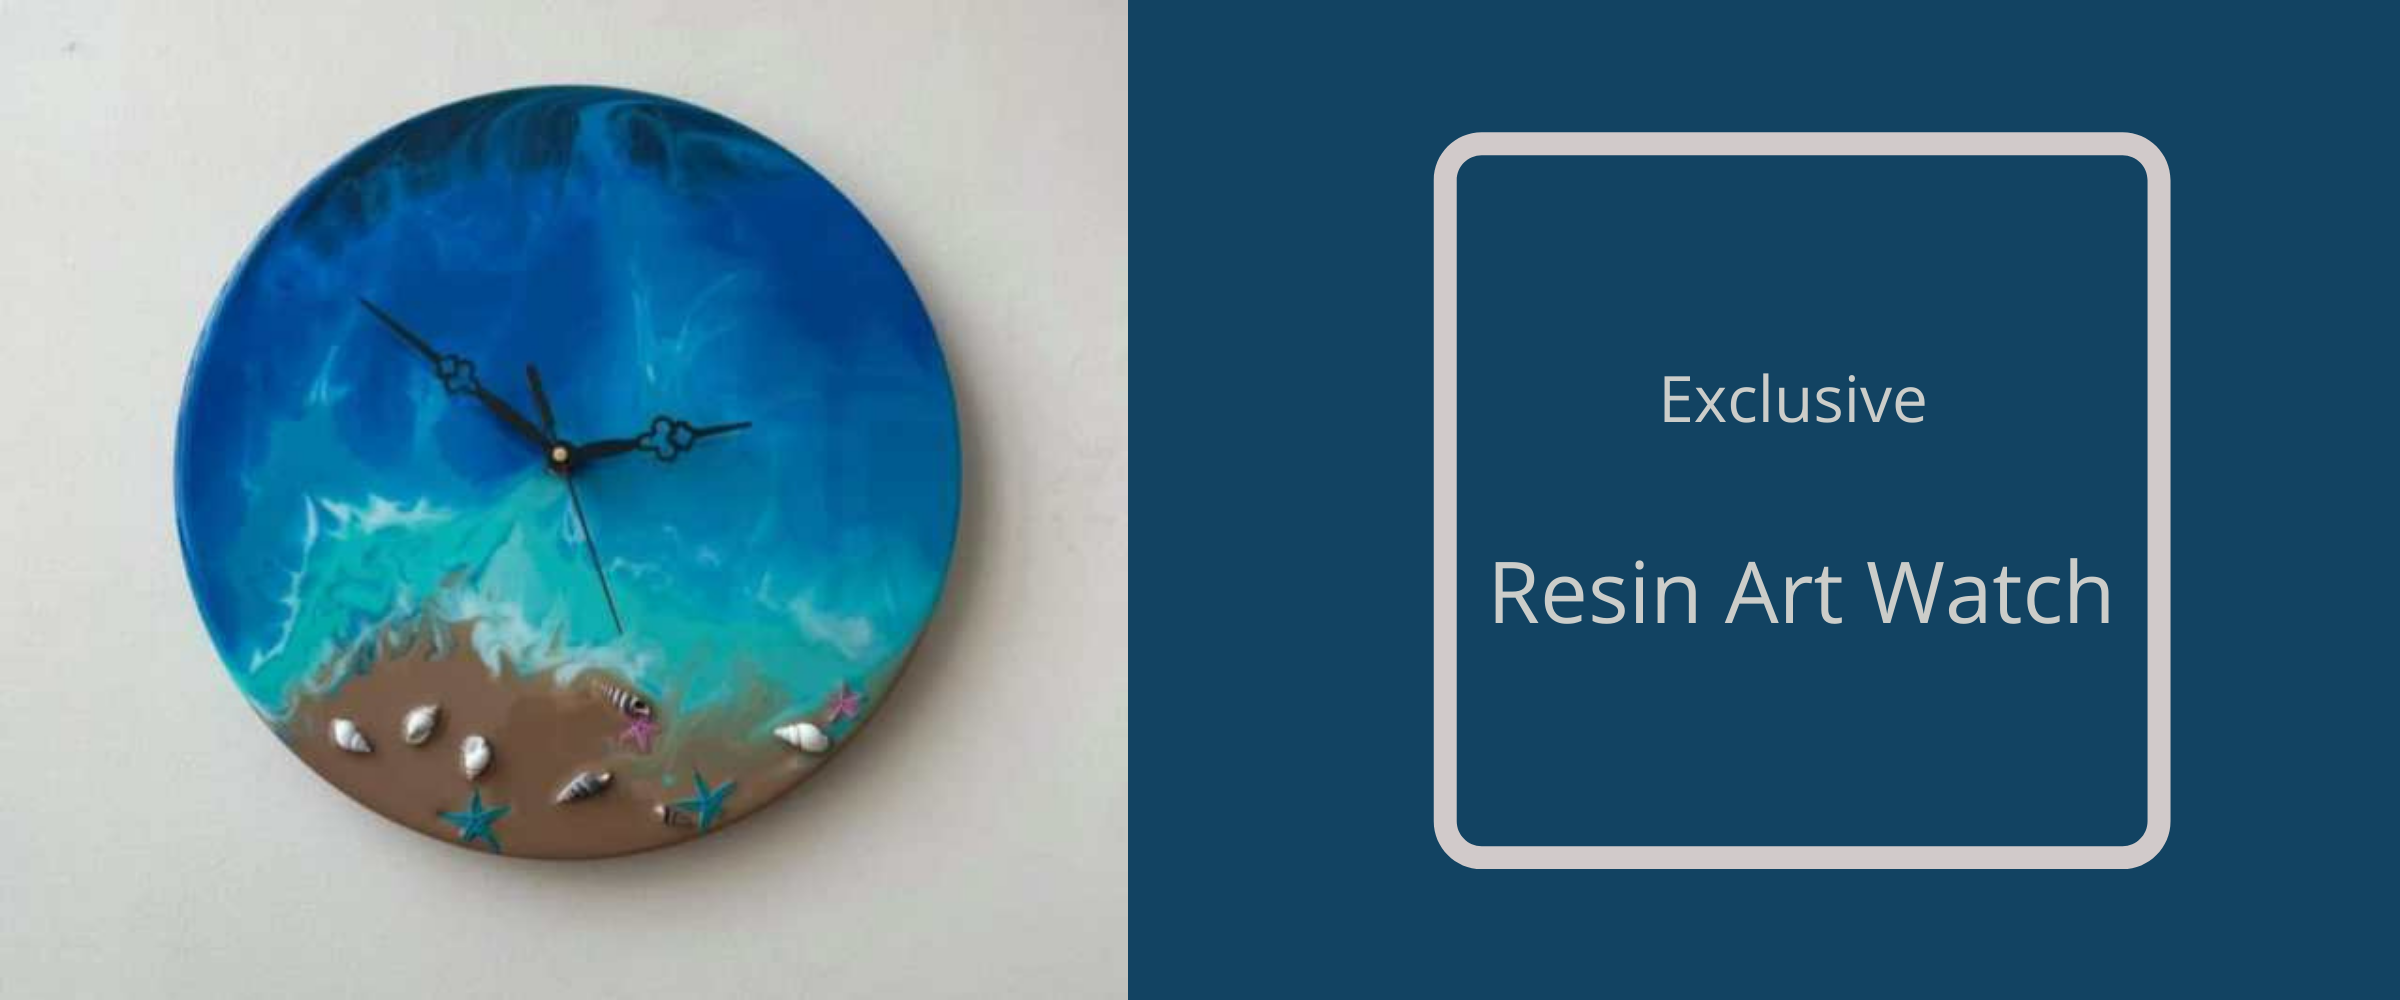 HAND MADE — Each Clock is effeciently designed and is hand made using epoxy resin and teak wood which gives it very eye cathy